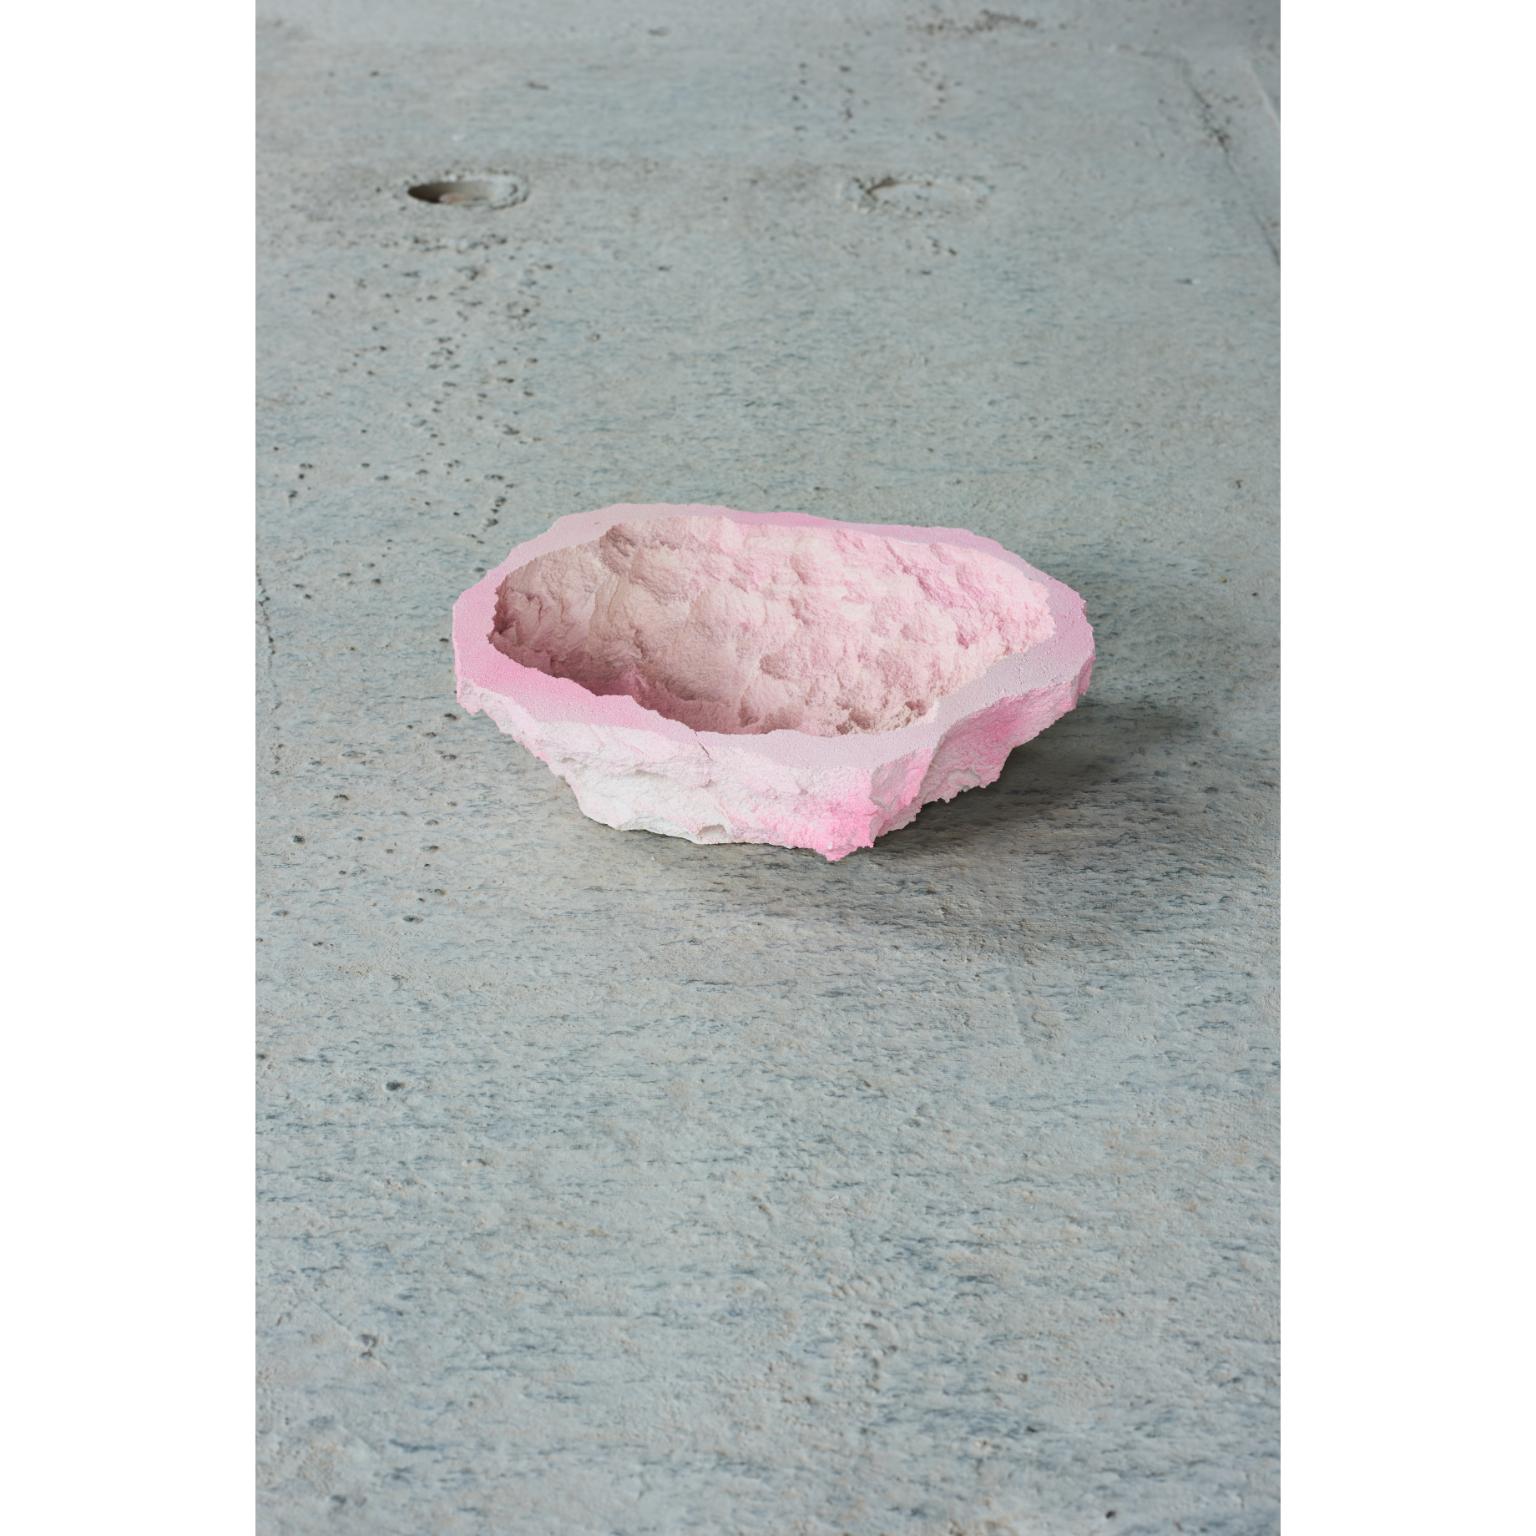 Crystal pond bowl by Andredottir & Bobek
Dimensions: W 11 x H 30 cm
Materials: Reused Foam/mattress and Jesmontite Hardner in Color Pink Fade.

Artificial Nature is a collaboration between the artist and design duo Josephine Andredottir and